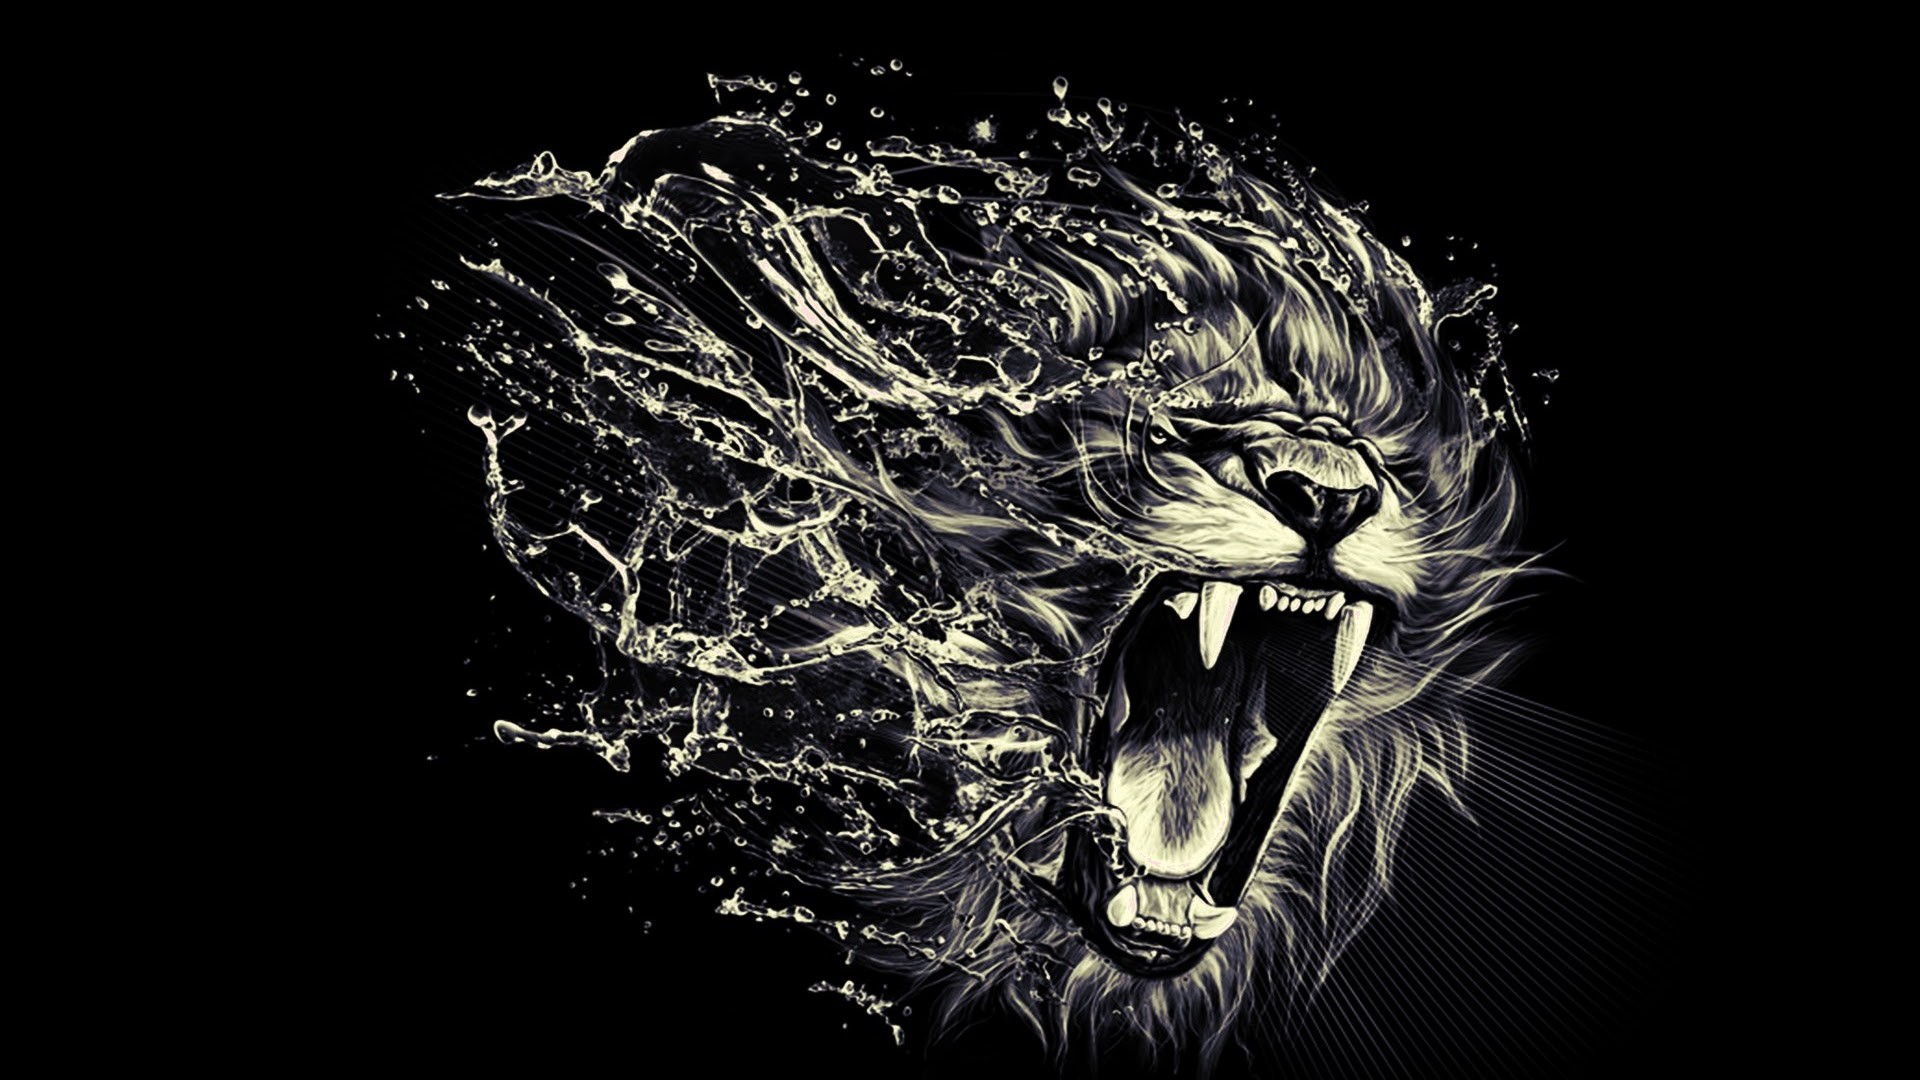 1920x1080 Best 25+ Lion hd wallpaper ideas on Pinterest | Lion images, Lion tattoo  images and Pretty phone wallpaper